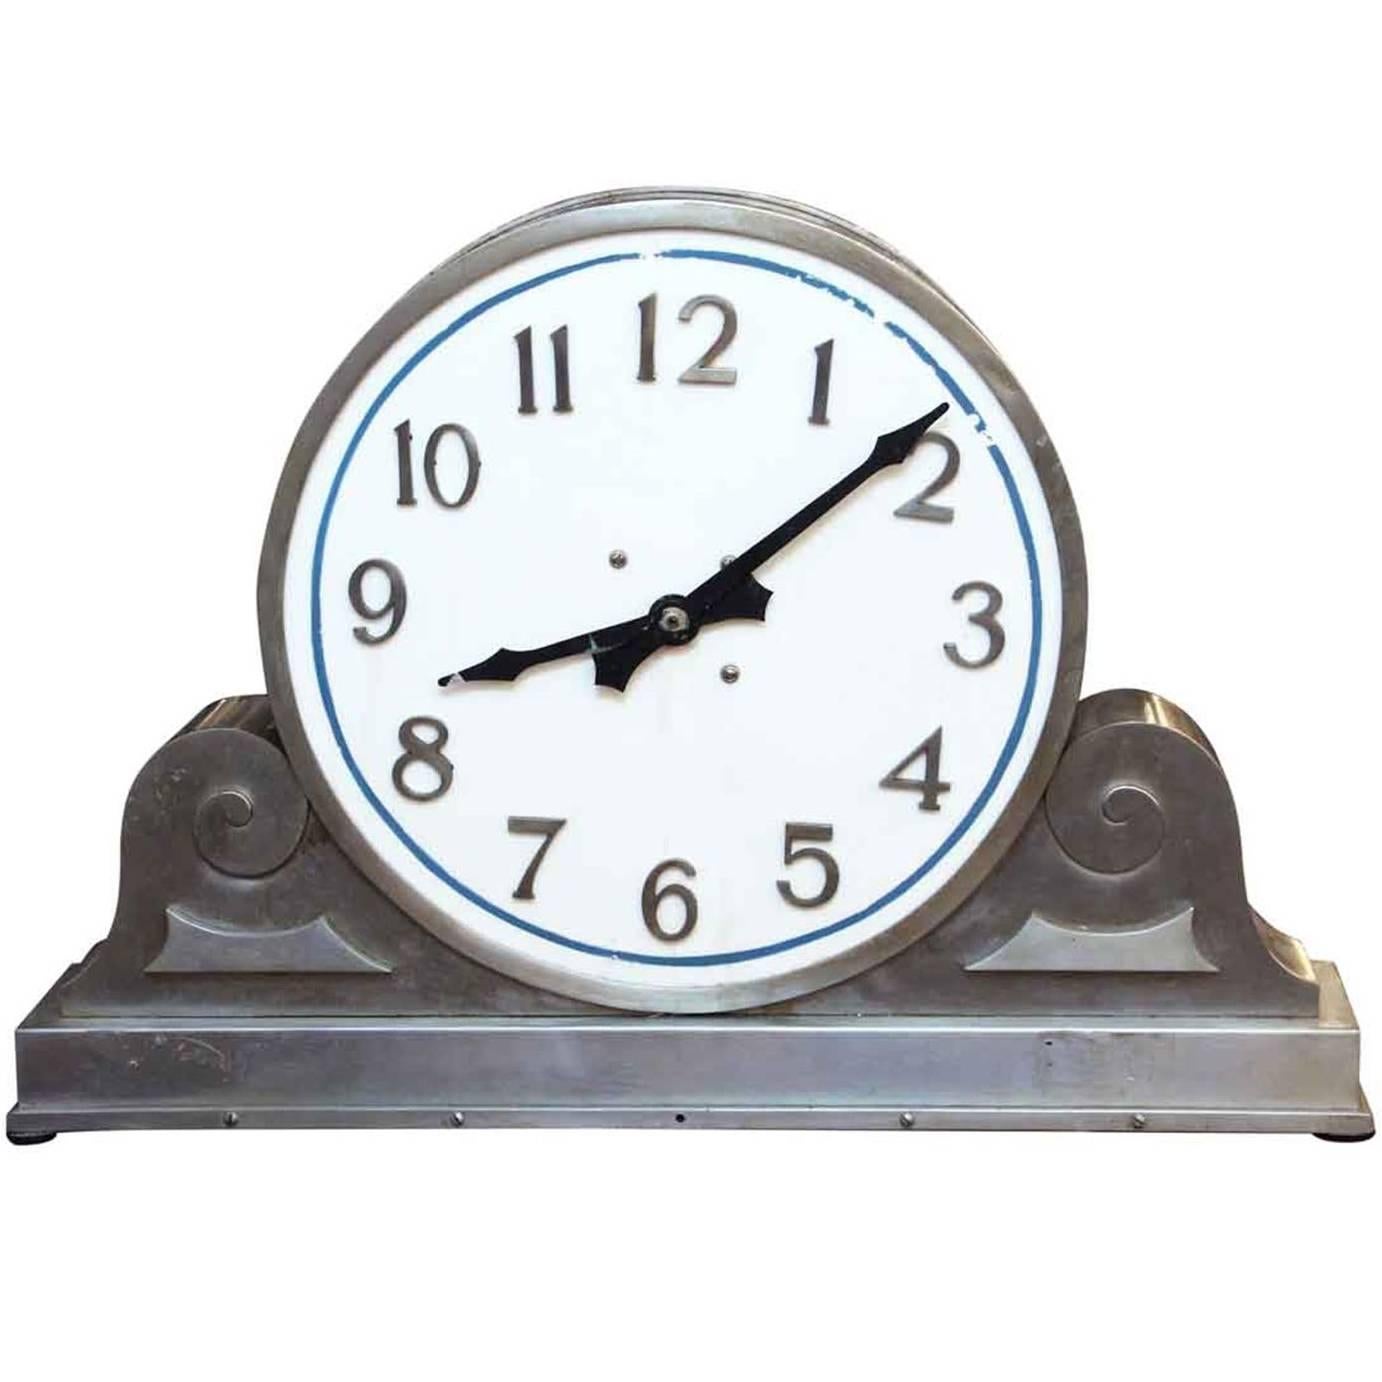 1930s Stainless Steel and Milk Glass Clock Face Clock from a New England Bank